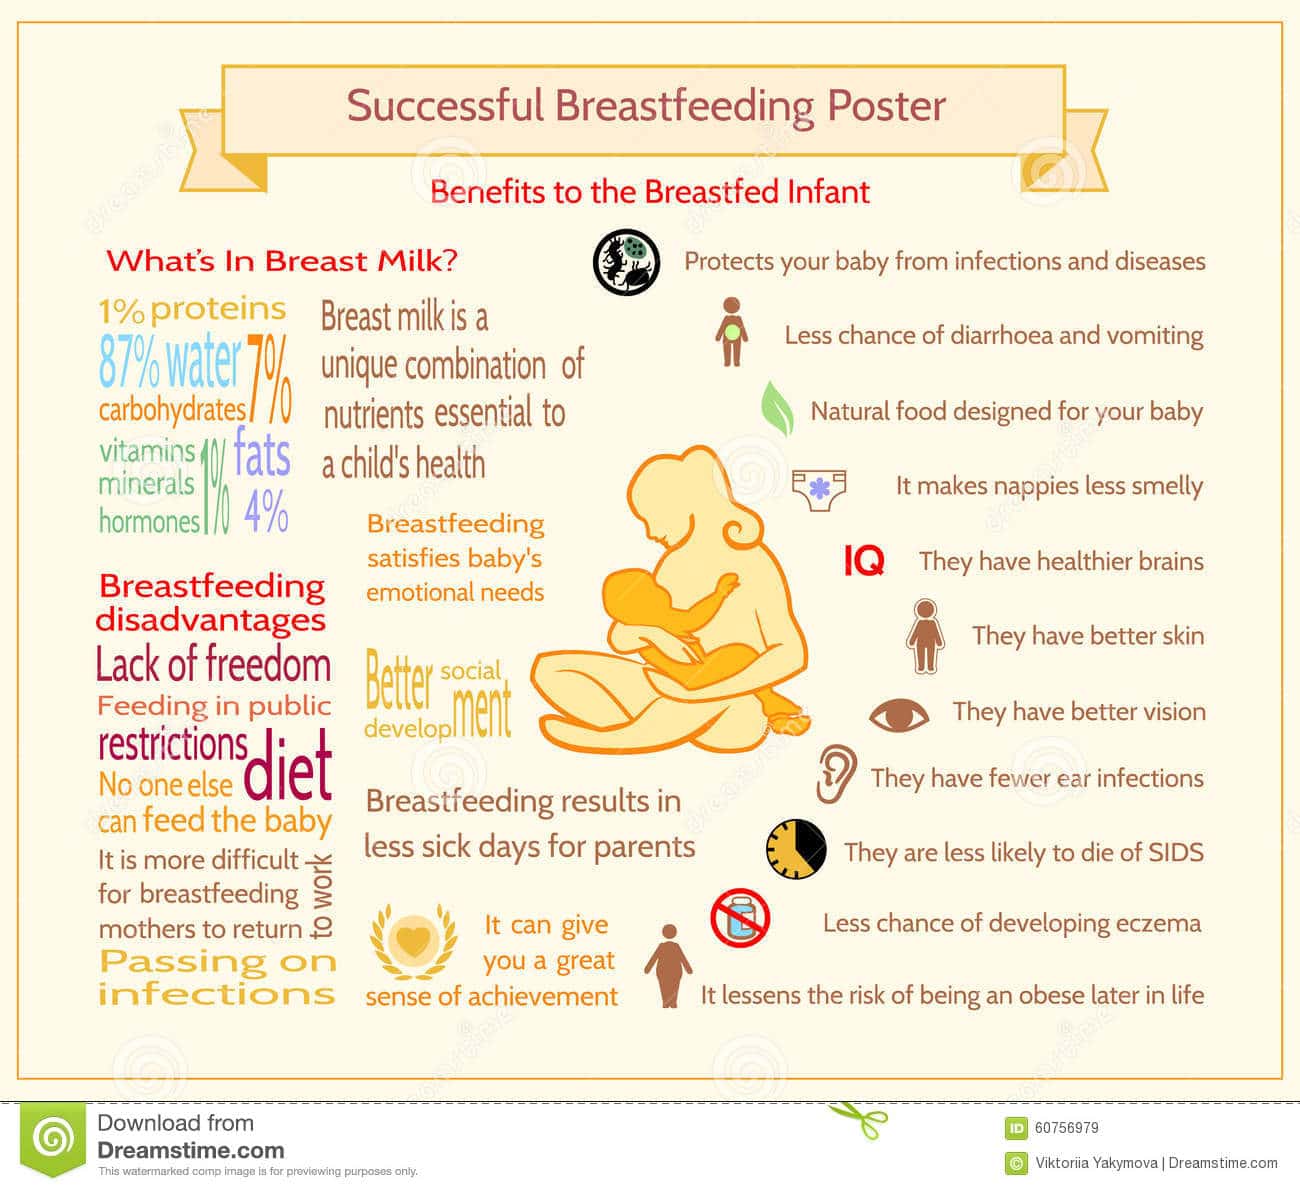 How Much Does Breastfeeding Reduce The Risk Of Breast Cancer ...